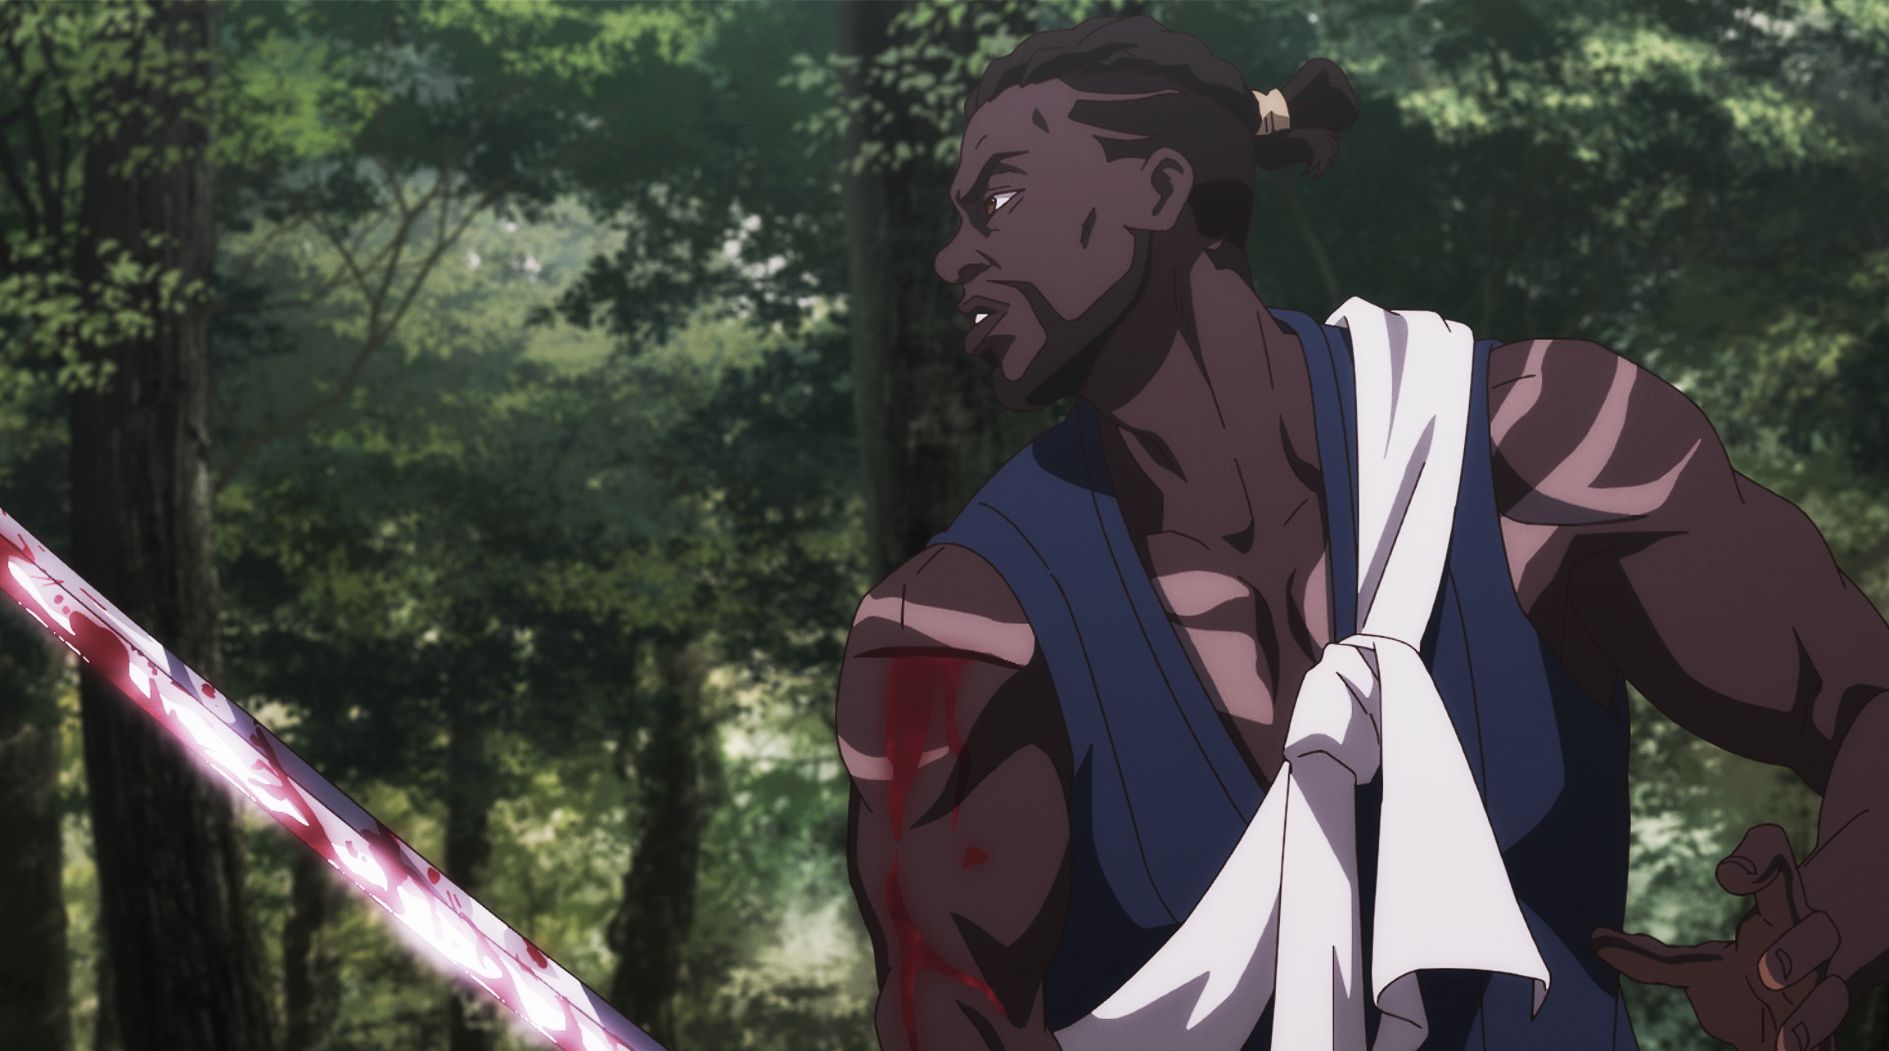 New Trailer for Yasuke Anime Features Japanese Voice Cast